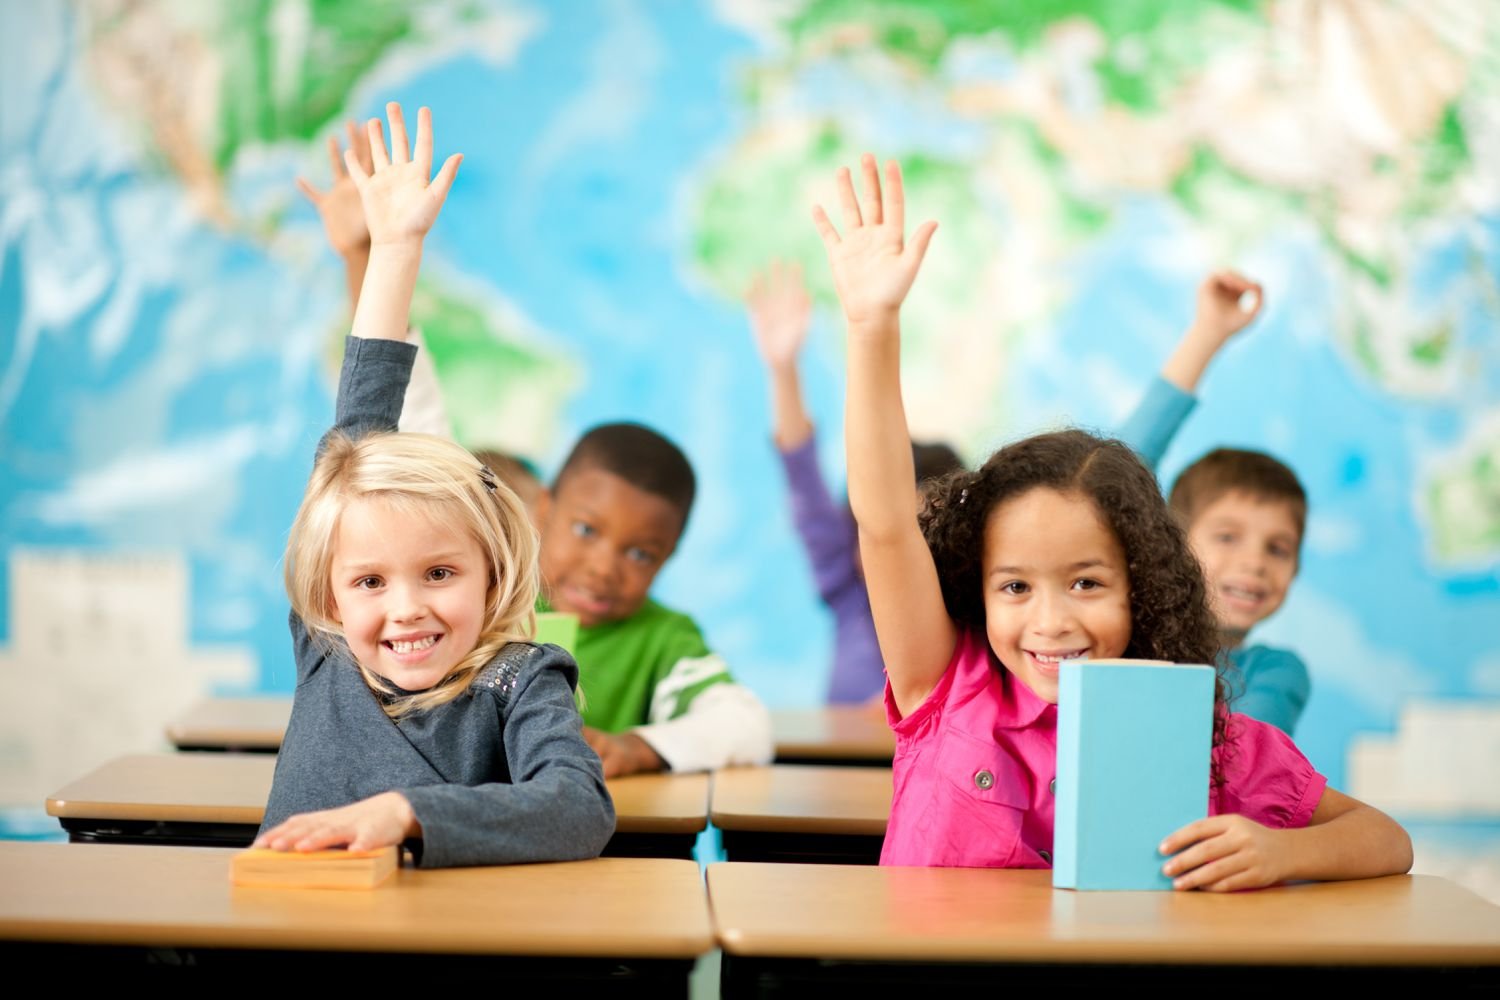 Getty first grade class students raising hands smiling LARGE Christopher Futcher 574b53845f9b5851654693f2